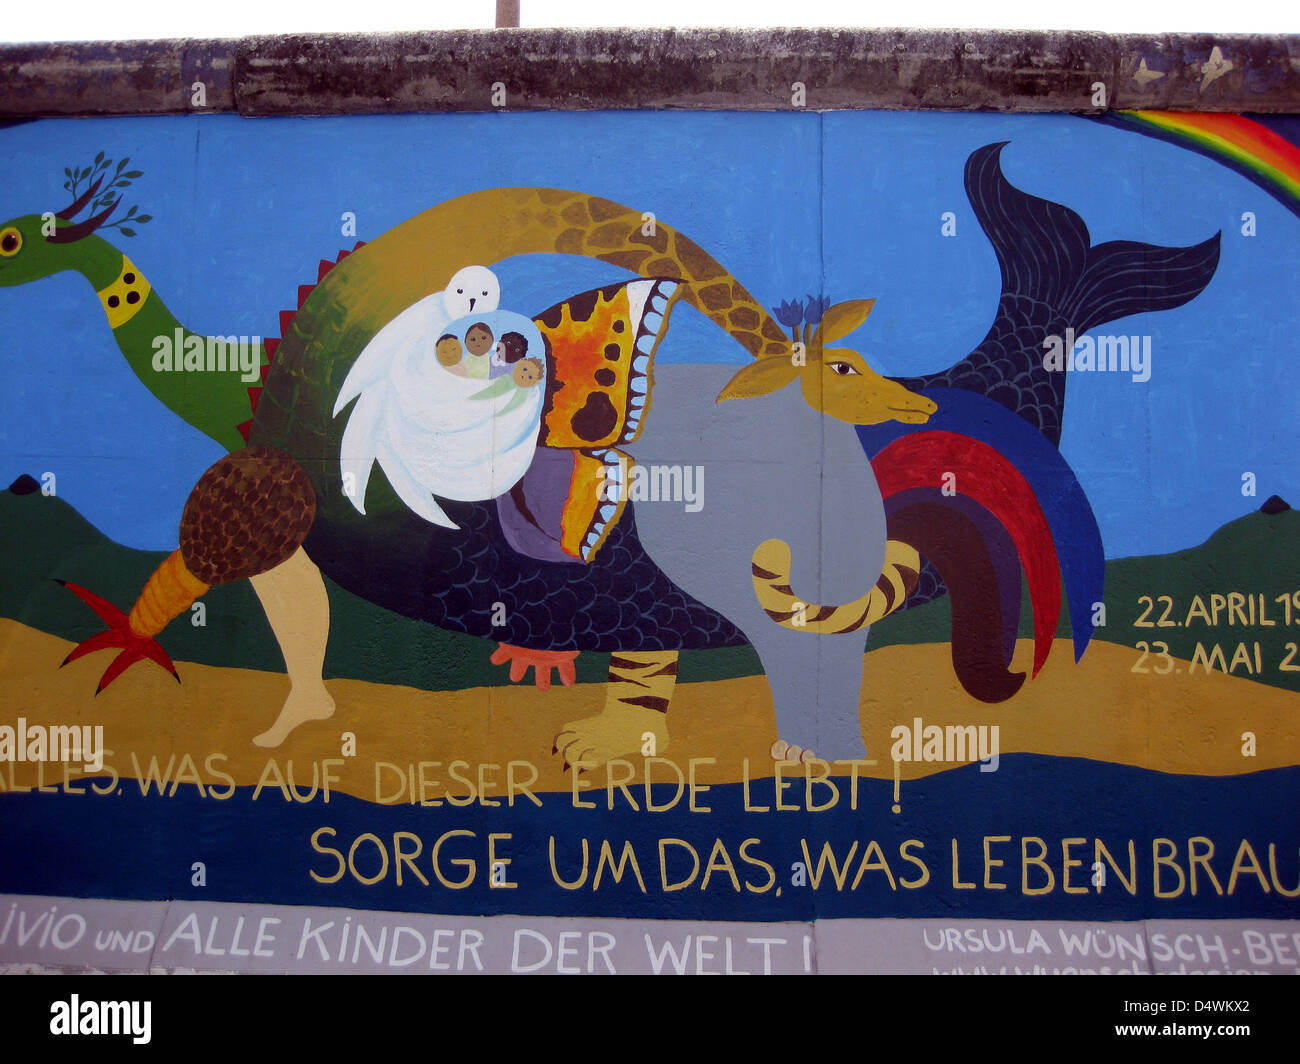 The artwork by Ursula Wünsch, 'Frieden ist alles' (Peace is Everything), is pictured on a section of the Berlin Wall at the East Side Gallery on Mühlenstrasse in Berlin, Germany, in August 2009. The concrete parts of the Berlin Wall between Ostbahnhof and Warschauer Strasse were painted by international artists after the opening of the inner-German border in November 1989. Photo: Dieter Palm Stock Photo